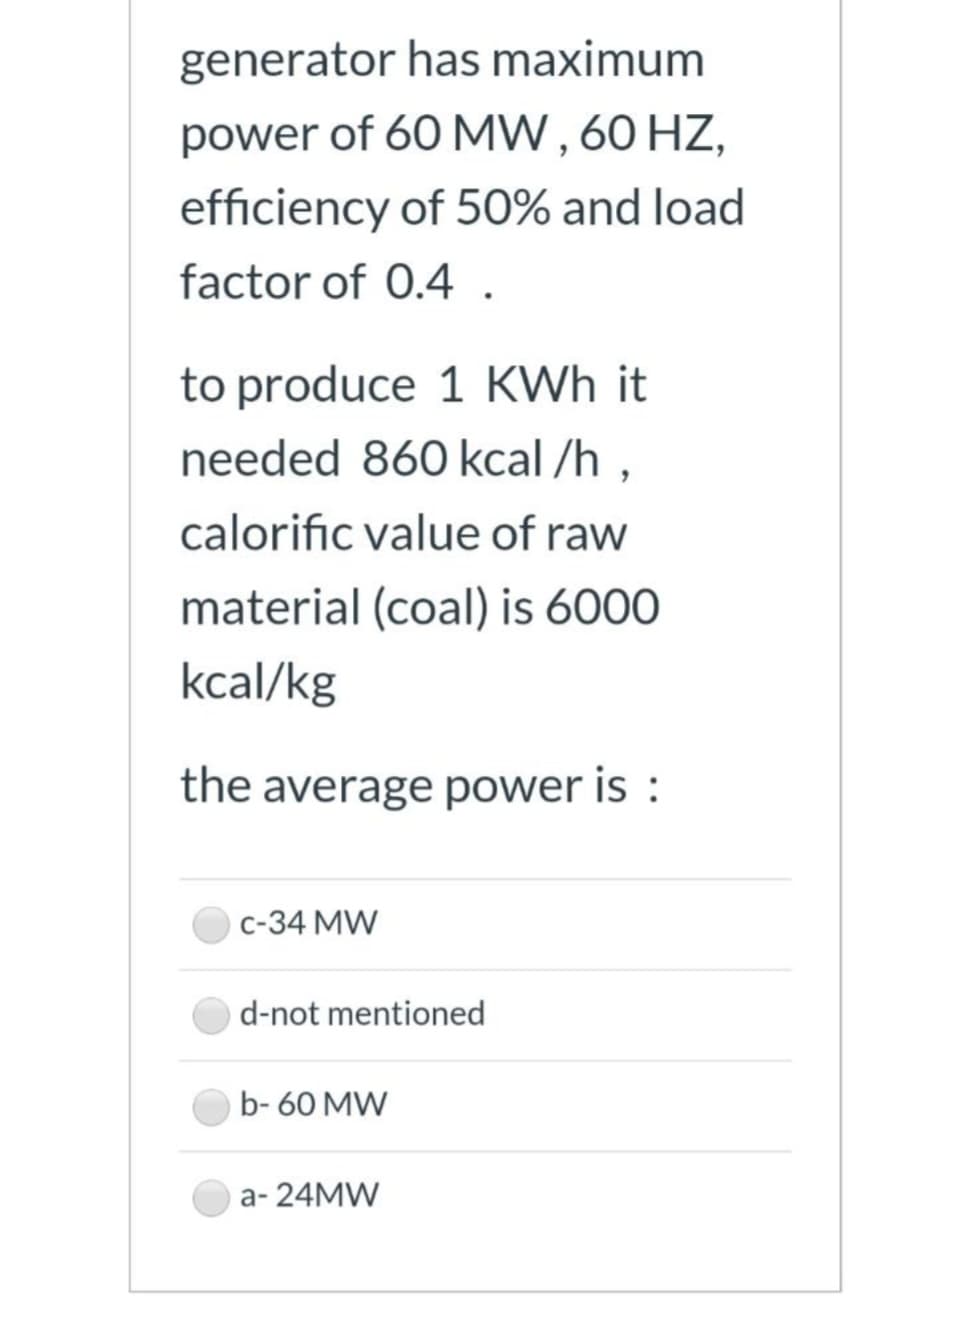 generator has maximum
power of 60 MW, 60 HZ,
efficiency of 50% and load
factor of 0.4 .
to produce 1 KWh it
needed 860 kcal/h,
calorific value of raw
material (coal) is 6000
kcal/kg
the average power is:
C-34 MW
d-not mentioned
b-60 MW
a-24MW